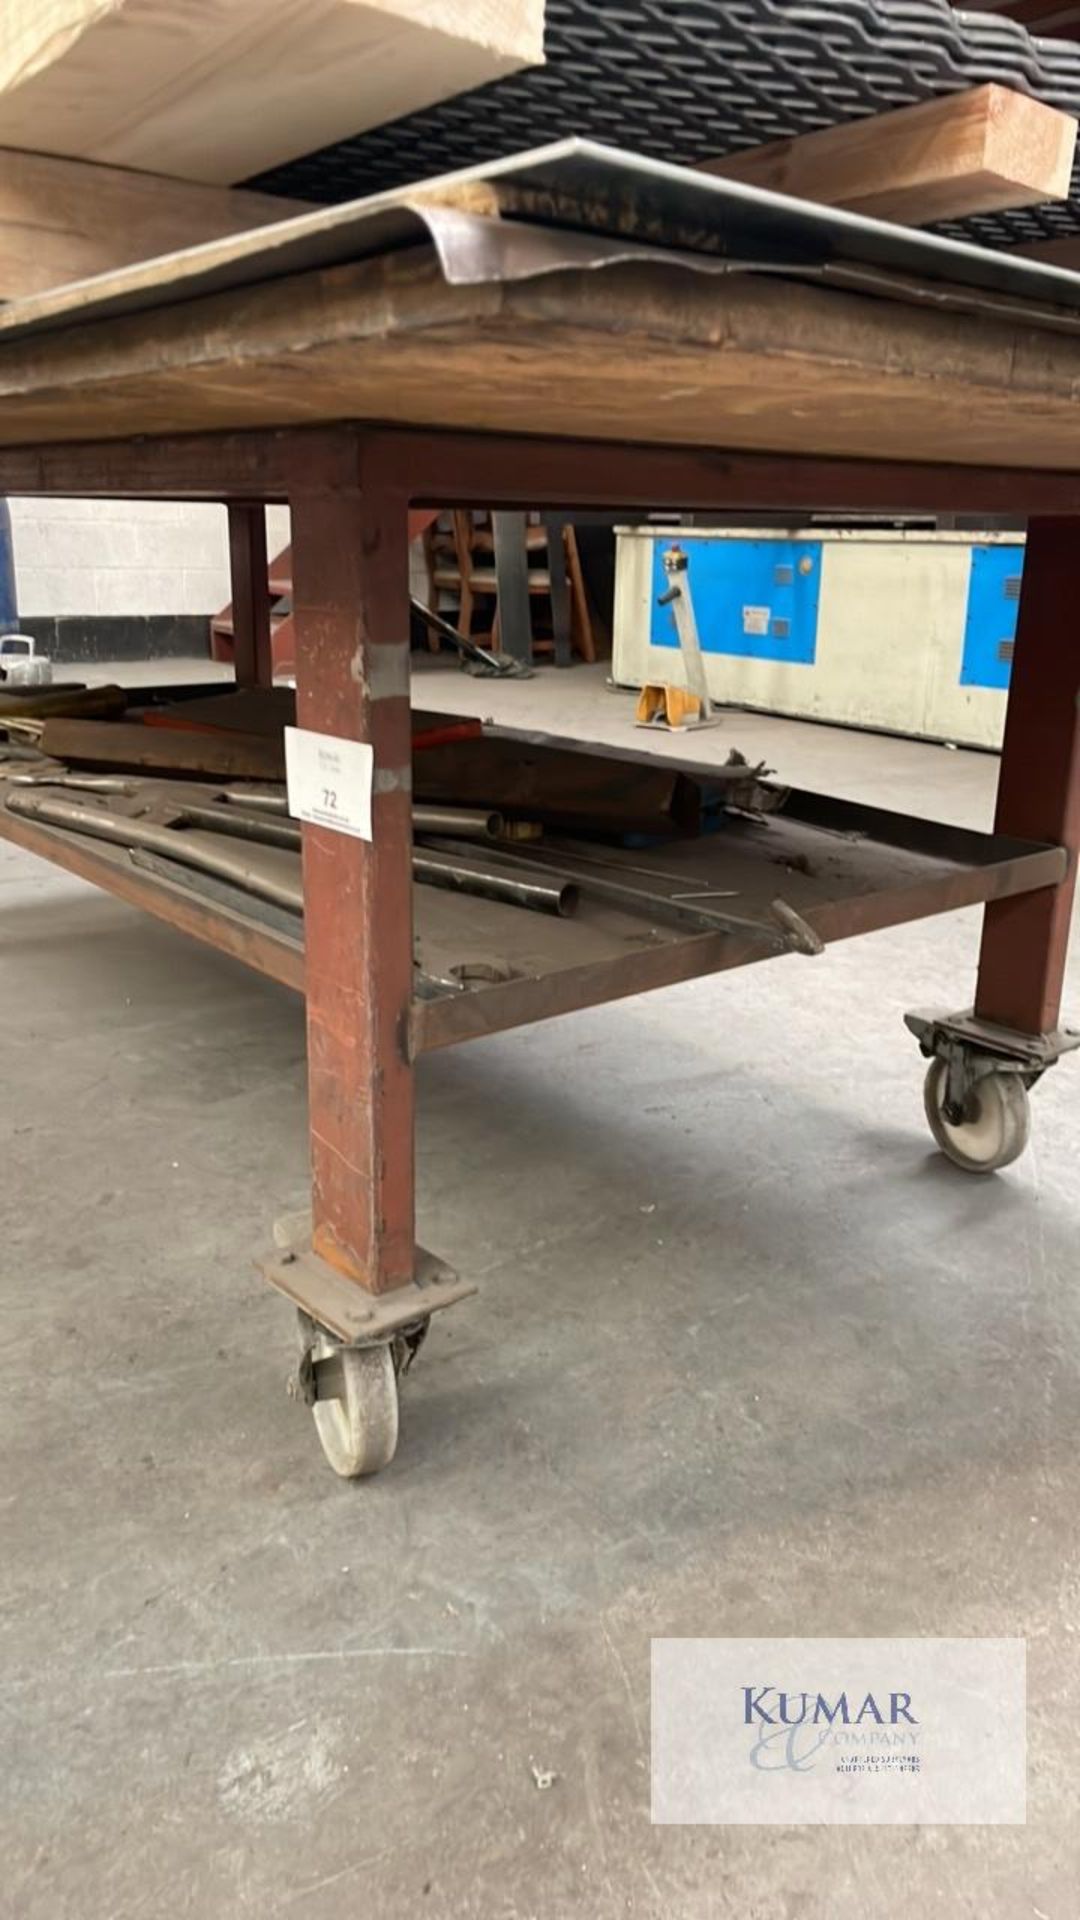 Sheet metal table on casters 1840mm long x 920mm wide 800mm high, with lower shelf Casters 150mm - Bild 4 aus 4